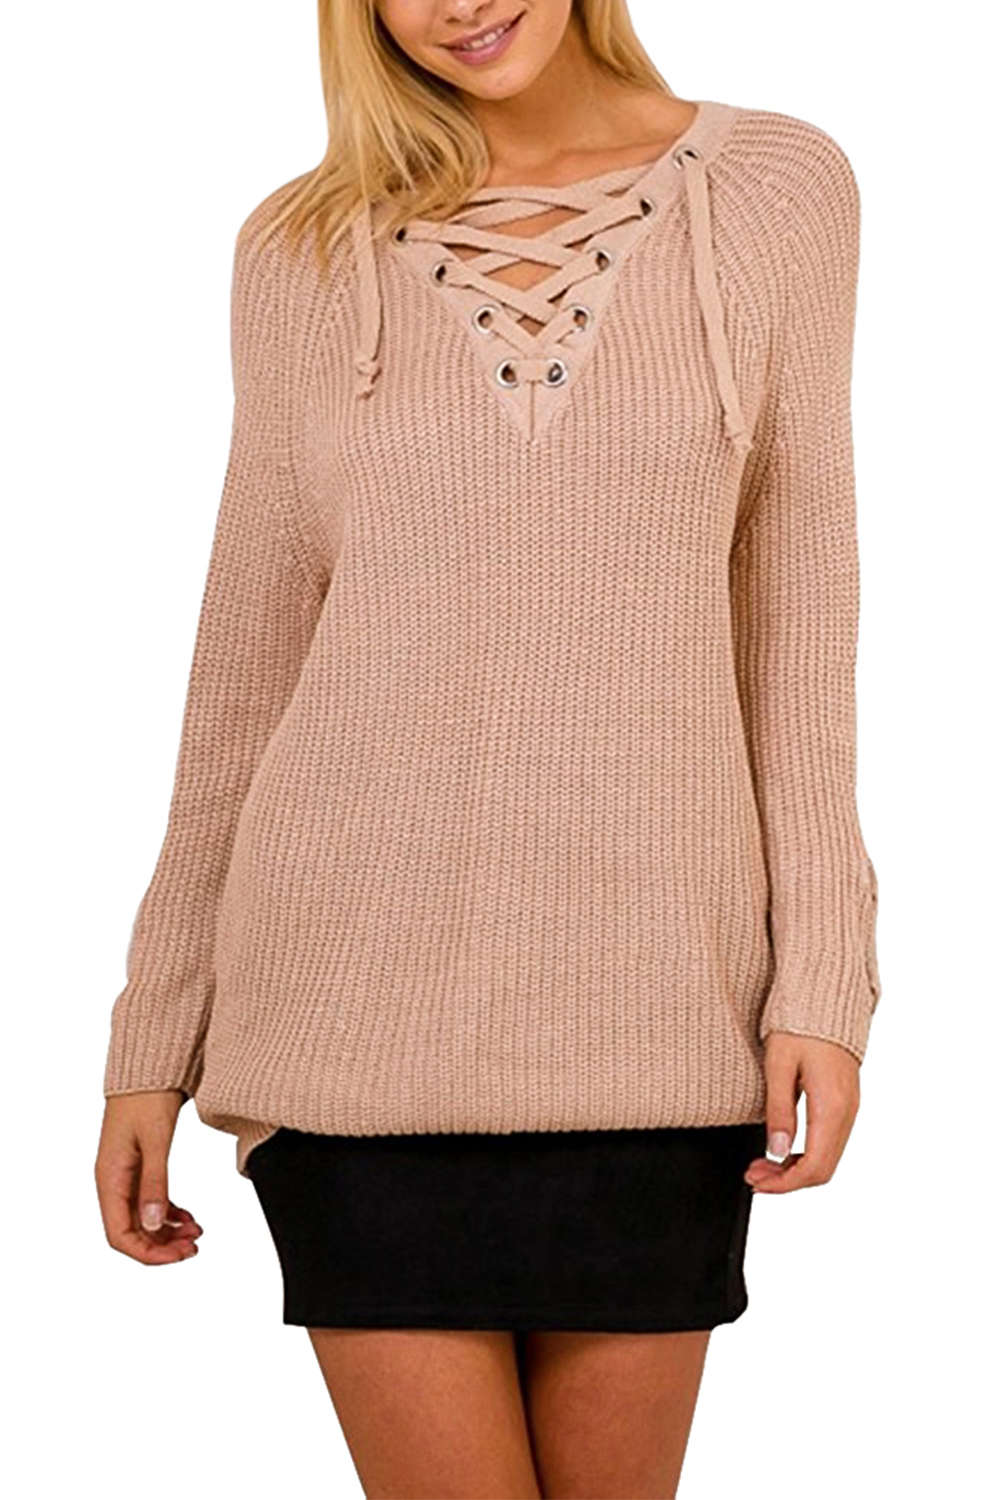 Iyasson Women Lace Up Front V Neck Long Sleeve Knit Sweater Top